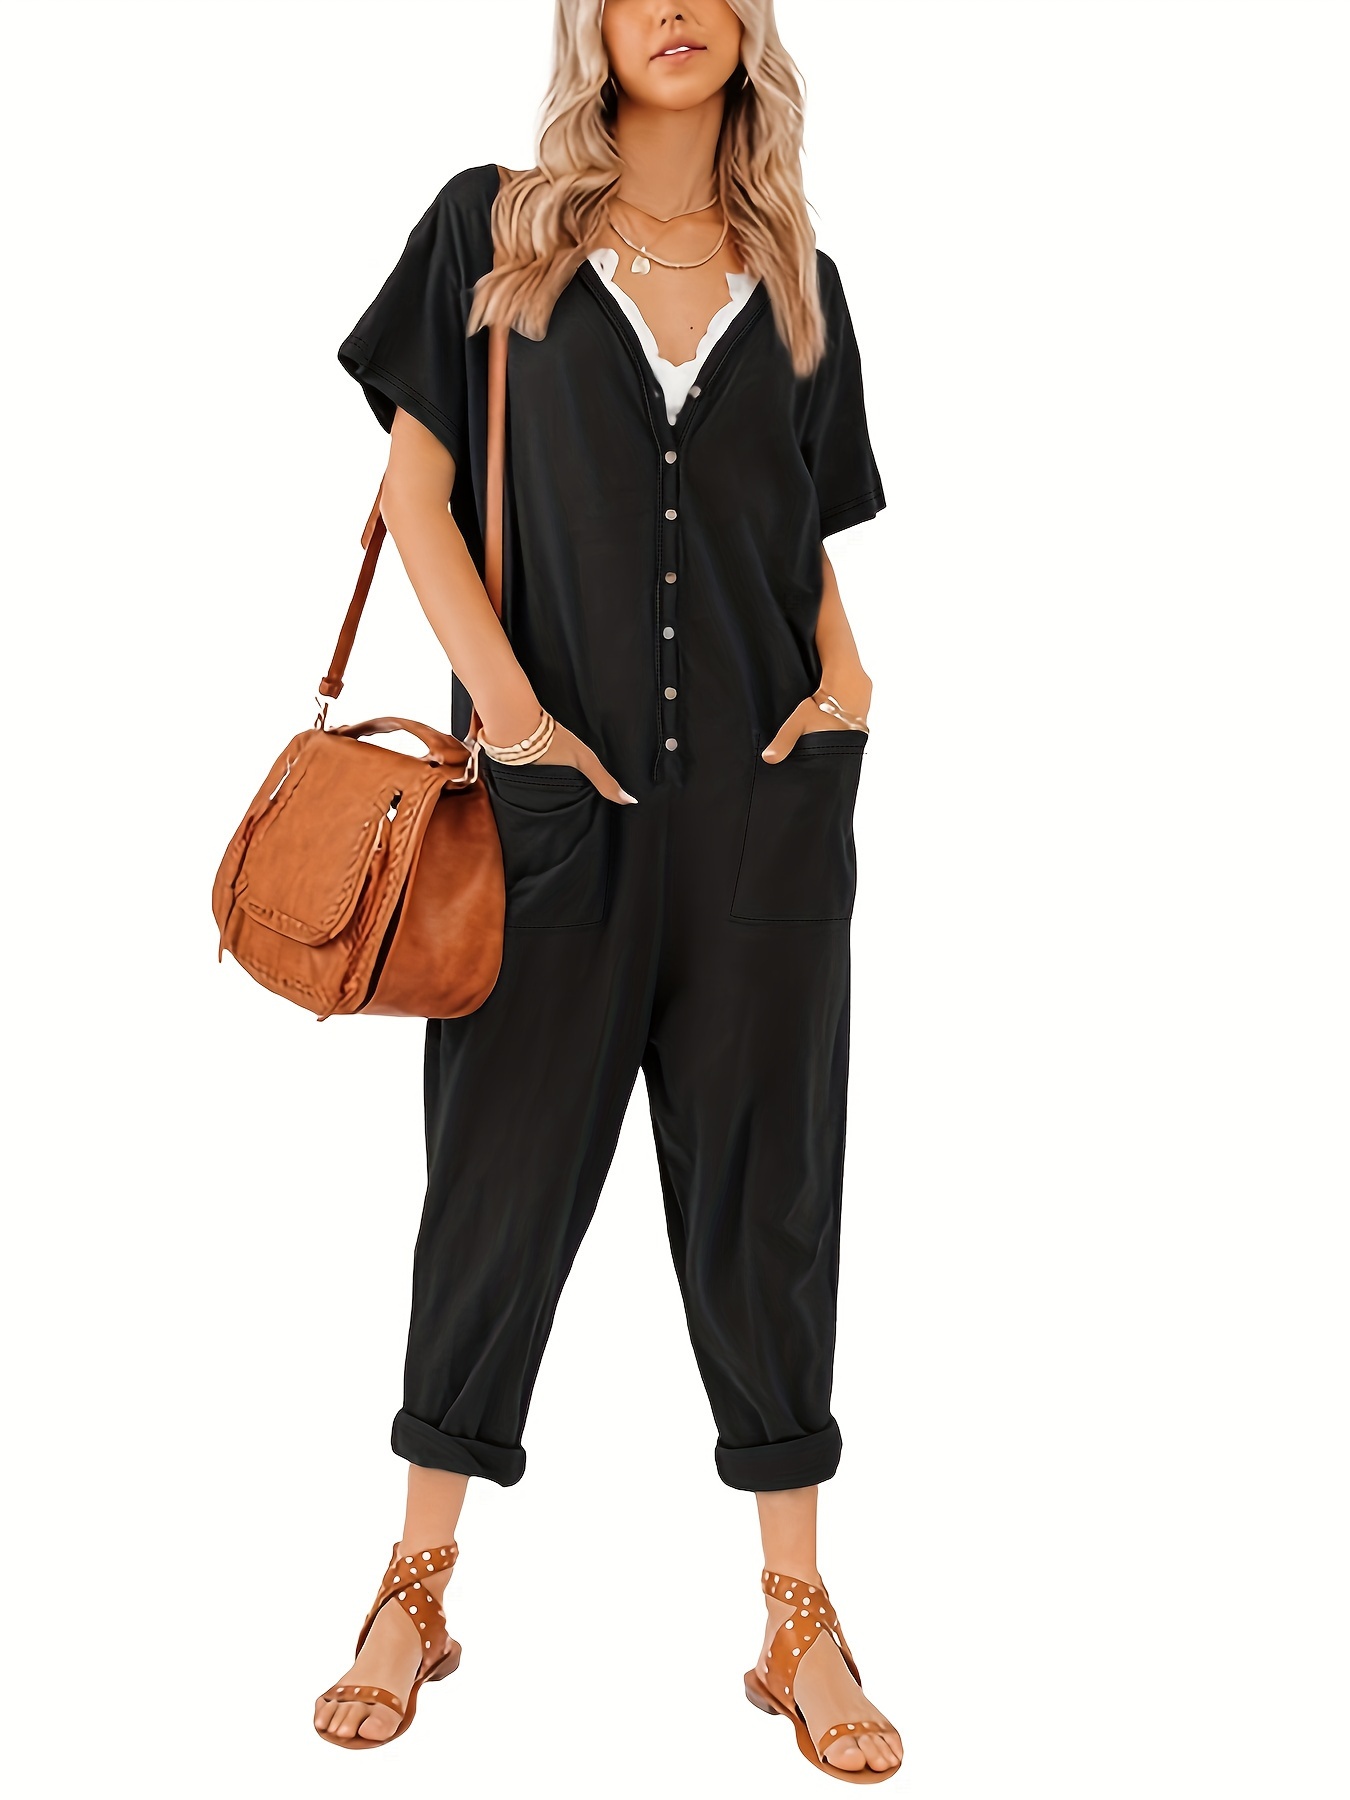 Jumpsuits For Women Summer Casual Short Sleeve Lapel Button Down